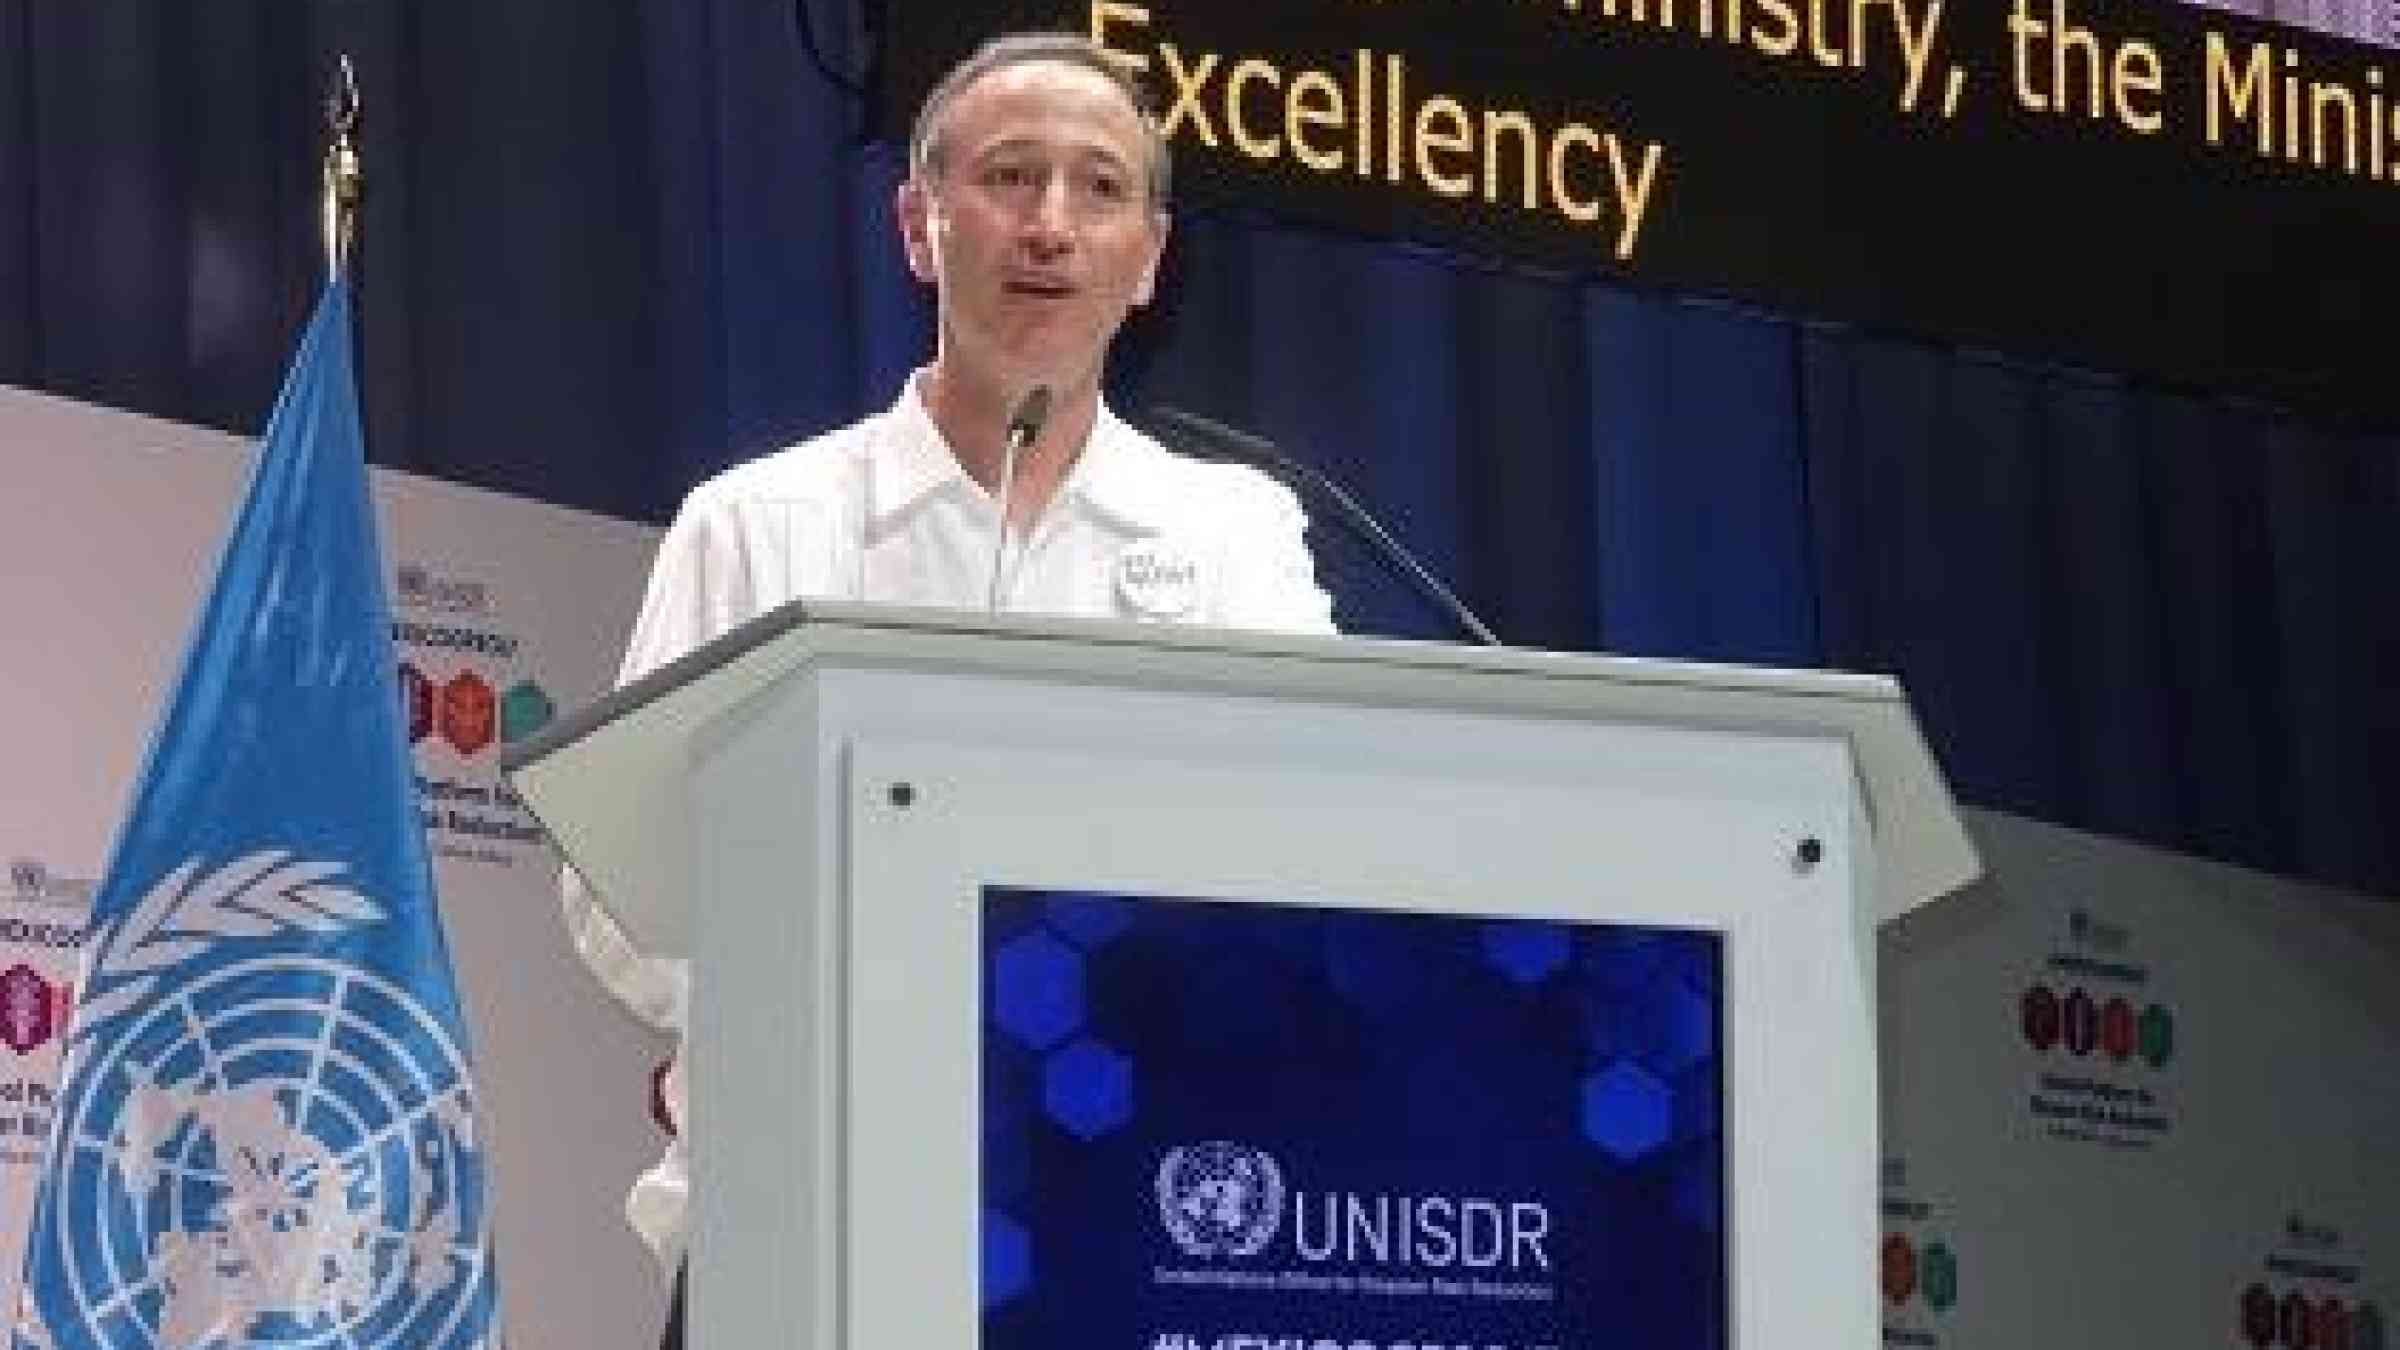 The UN Secretary-General's Special Representative for Disaster Risk Reduction, Mr. Robert Glasser, speaking at the close of the Global Platform (Photo: UNISDR)